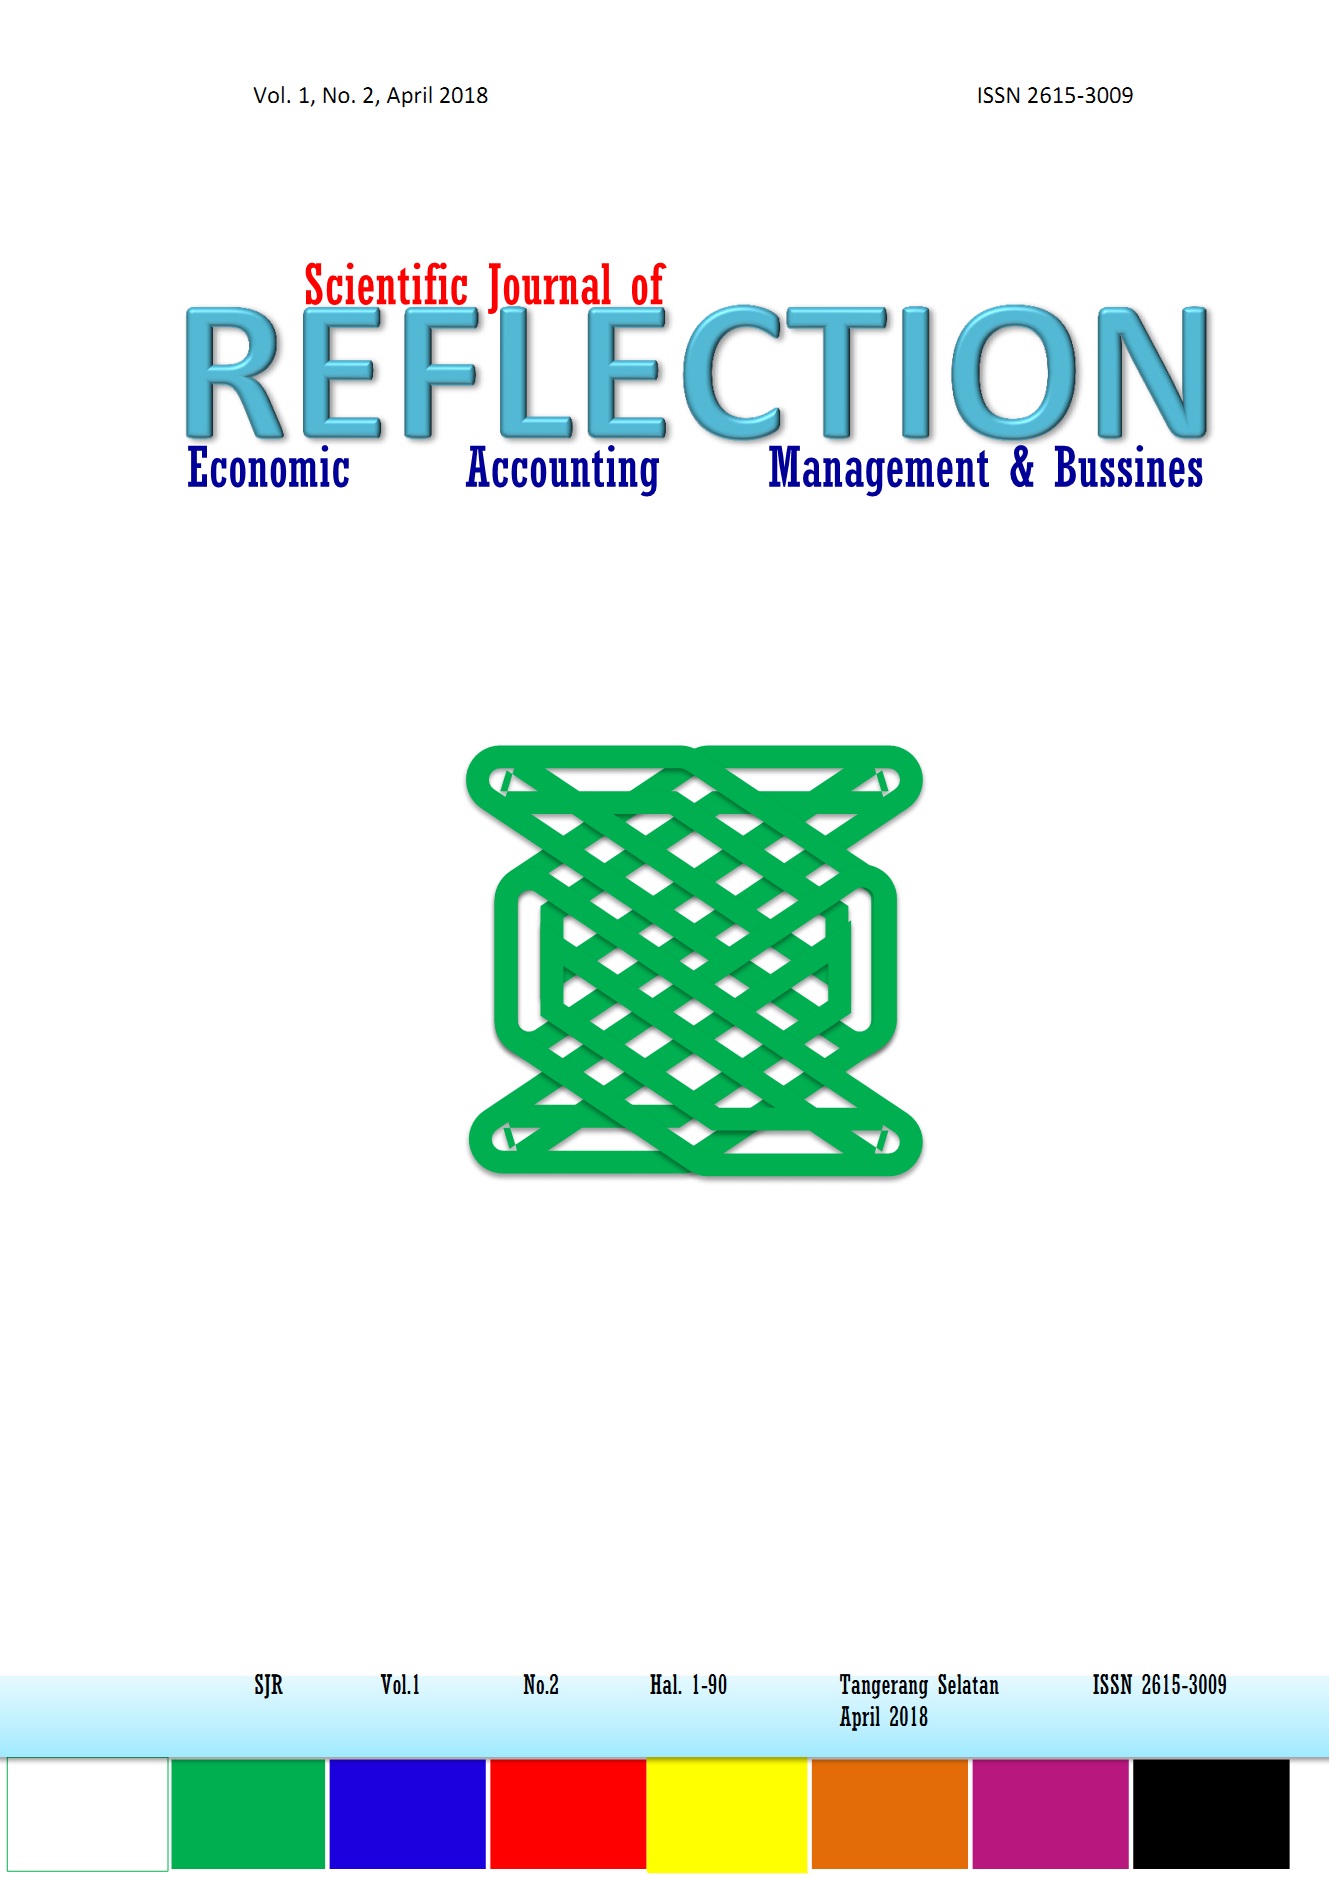 					View Vol. 1 No. 4 (2018): SCIENTIFIC JOURNAL OF REFLECTION : Economic, Accounting, Management and Business
				